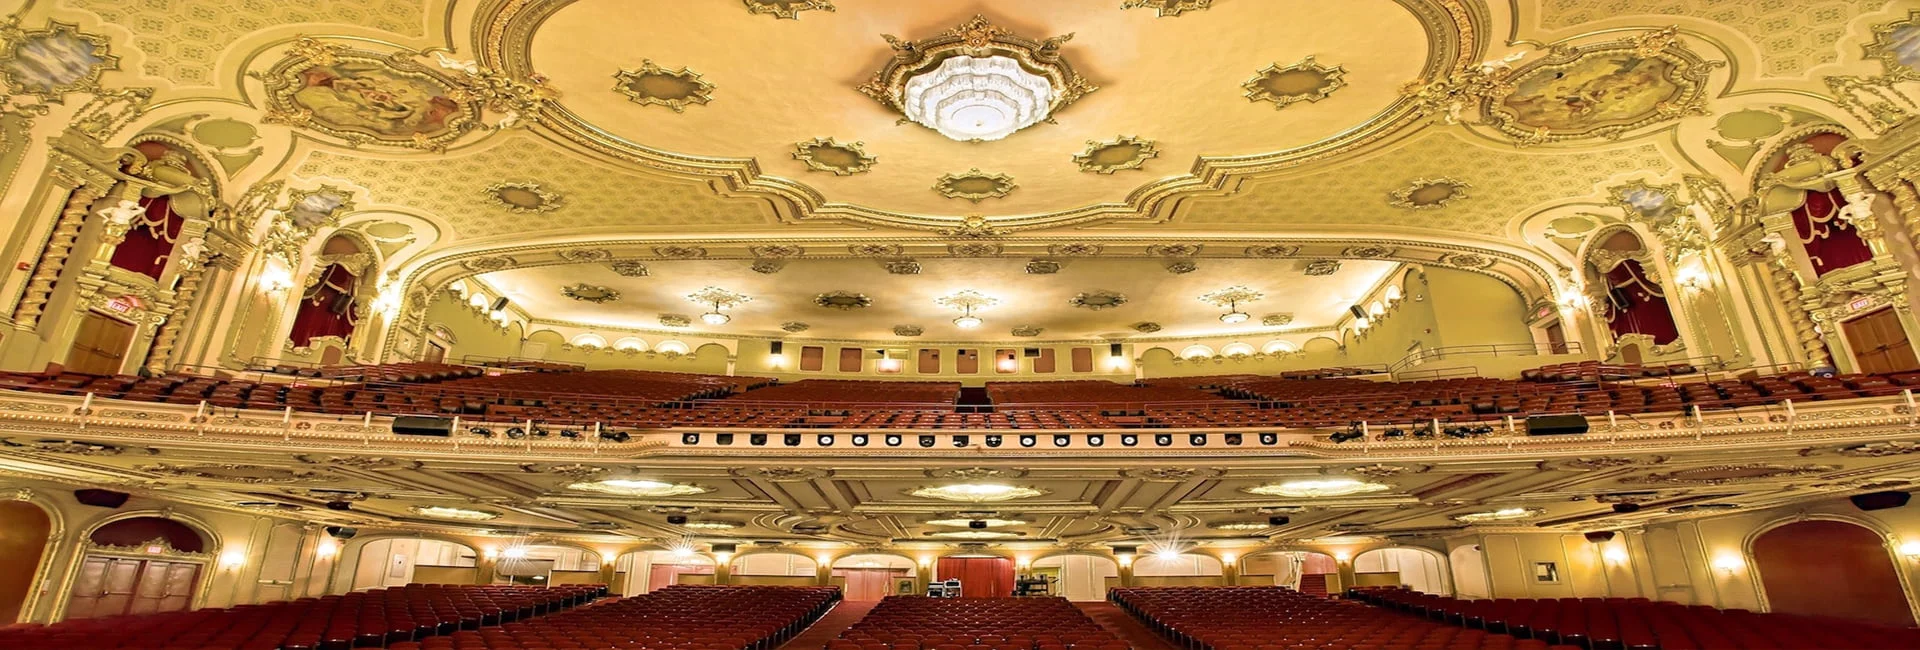 Palace Theatre, A view from the stage_Capital-Saratoga Region